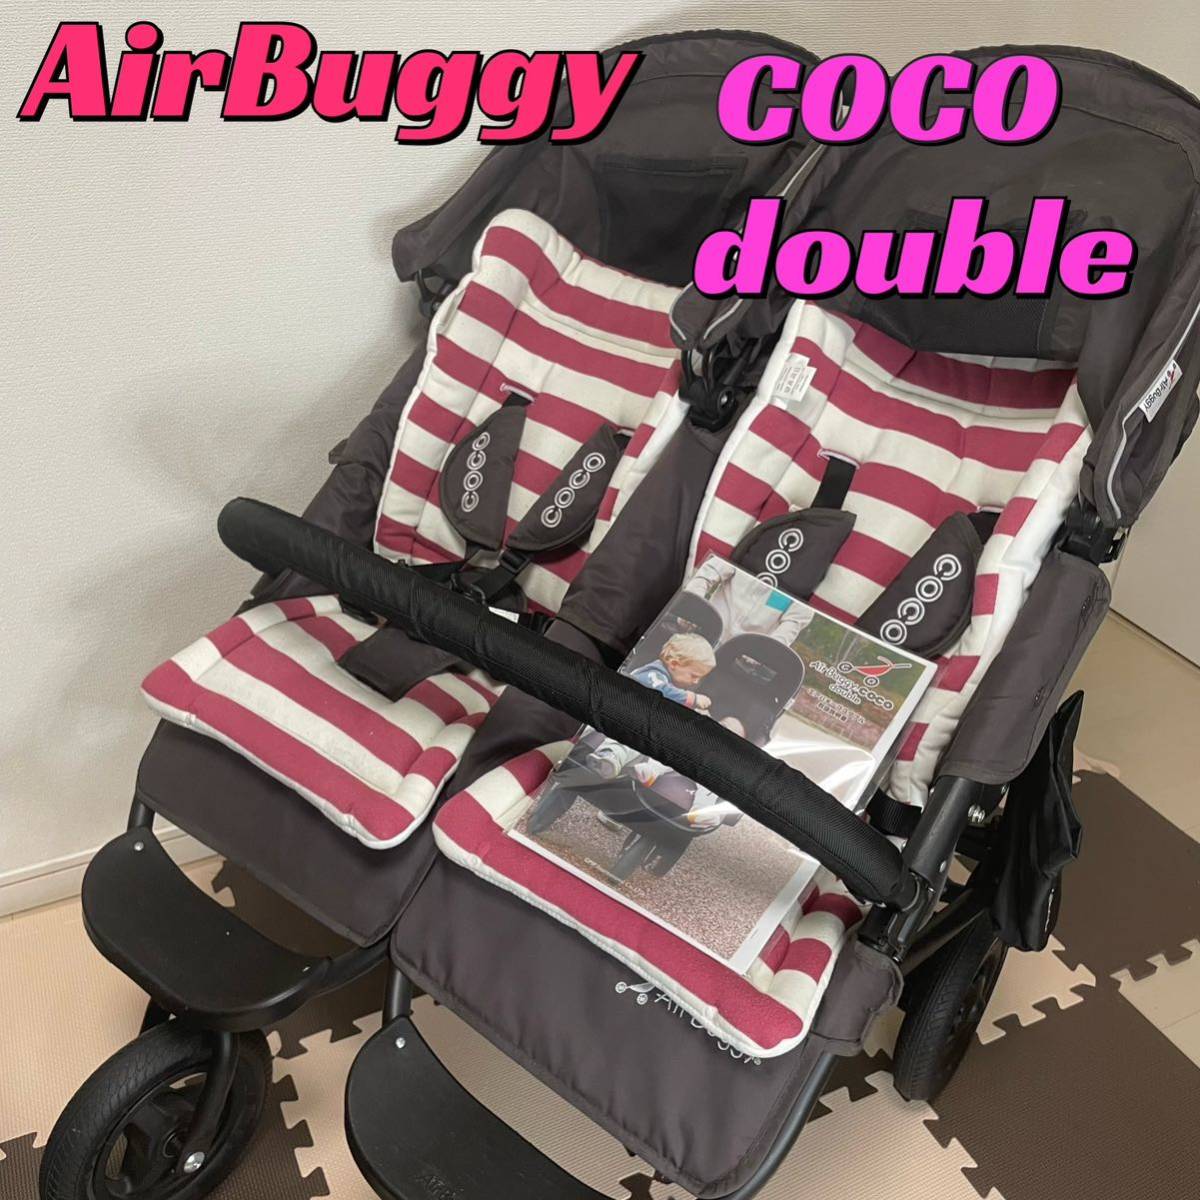 AirBuggy COCO DOUBLE エアバギーココ ダブル 二人乗りAirBuggy DOUBLE 二人乗りベビーカー